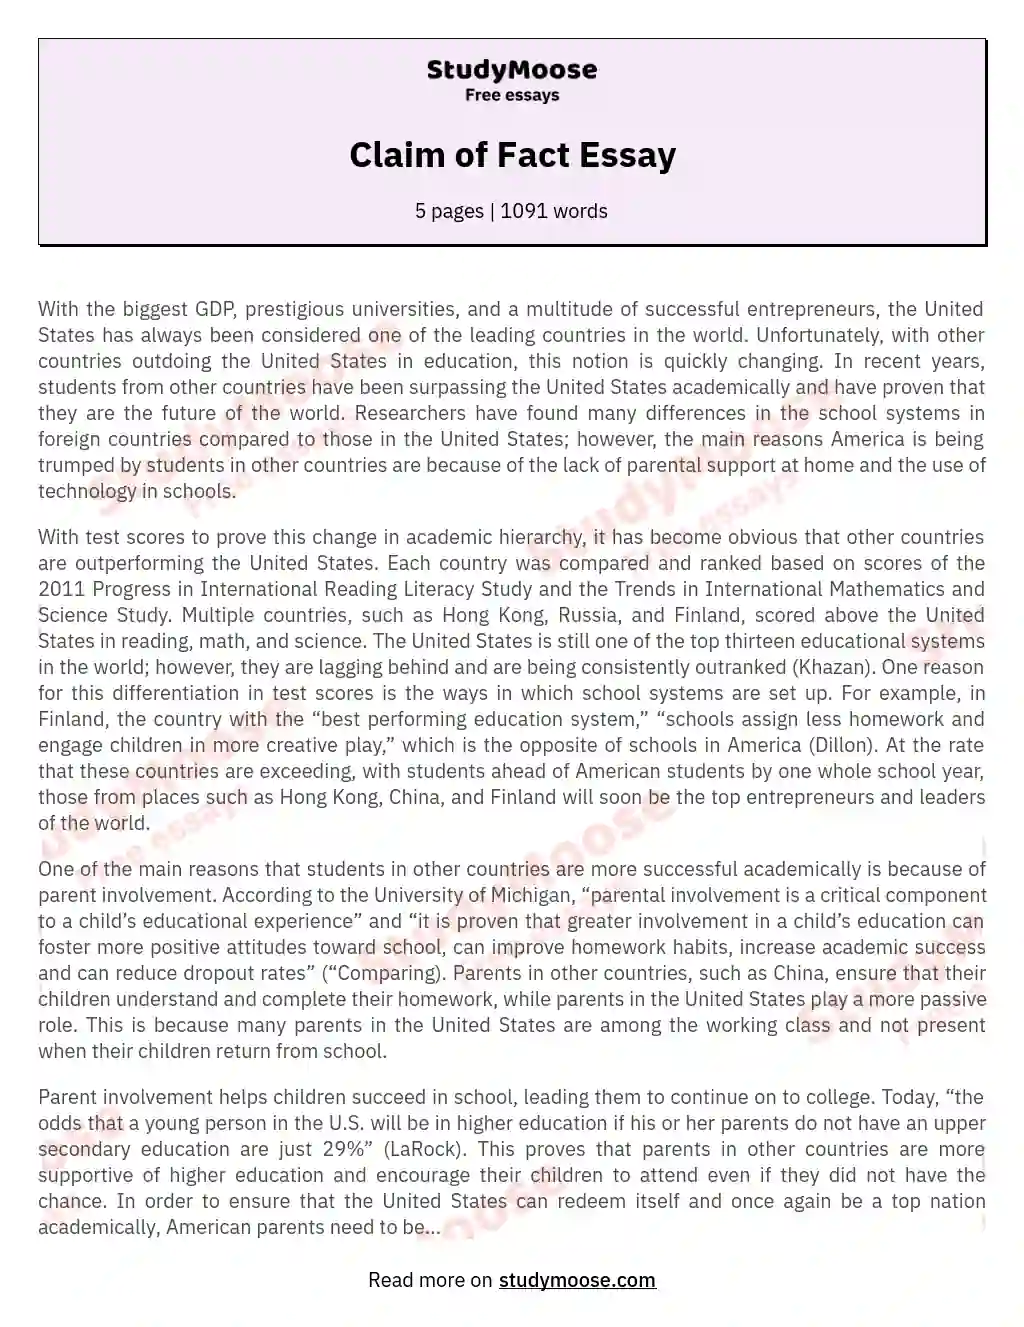 claim of fact essay meaning